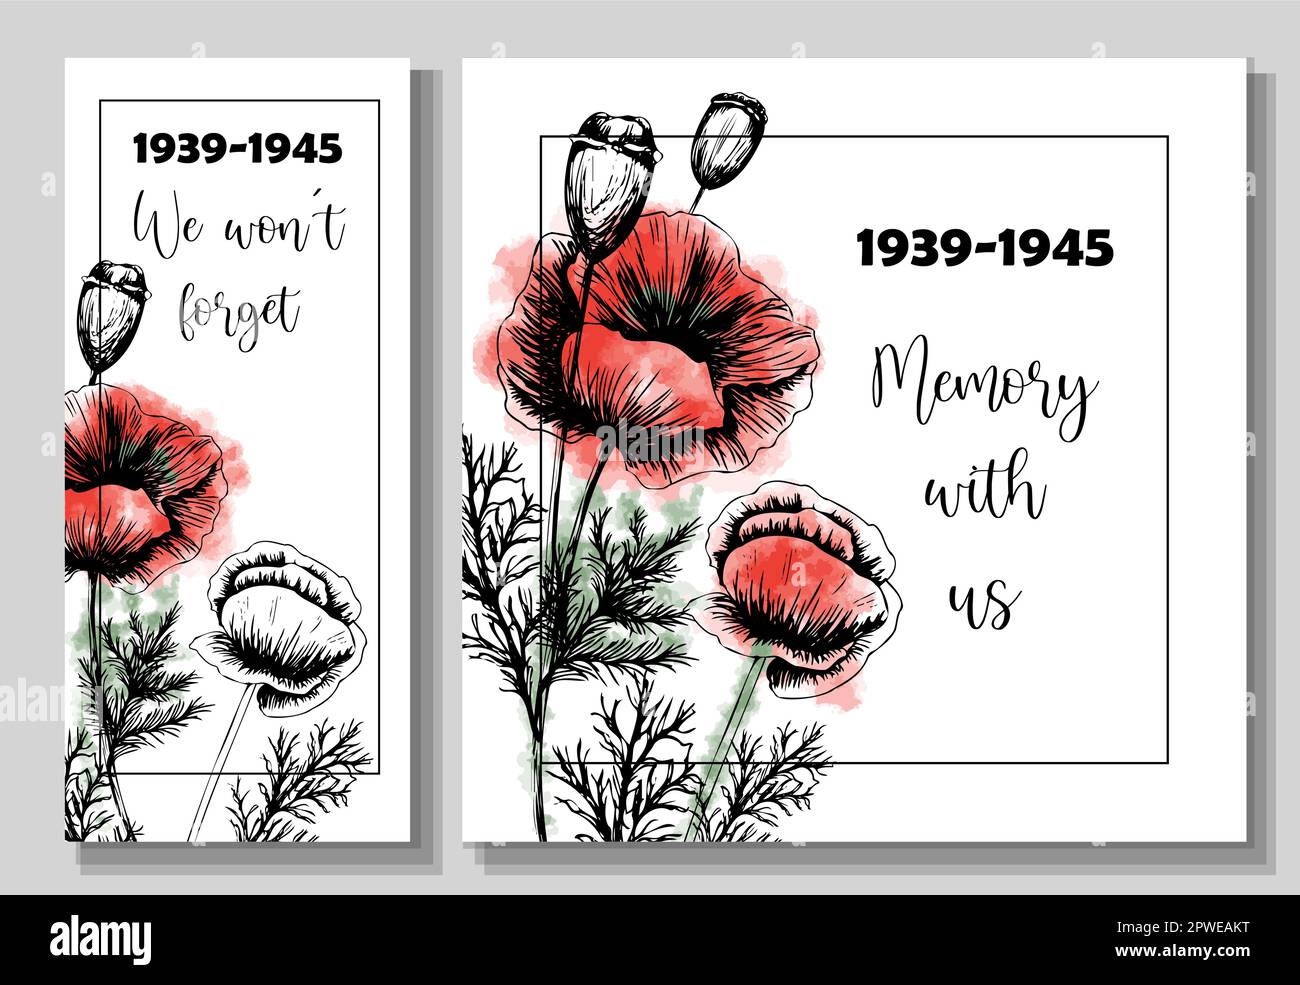 Remembrance day banner set. Poster about World War II 1939-1945. Red poppies are a symbol of memory and sorrow Stock Vector